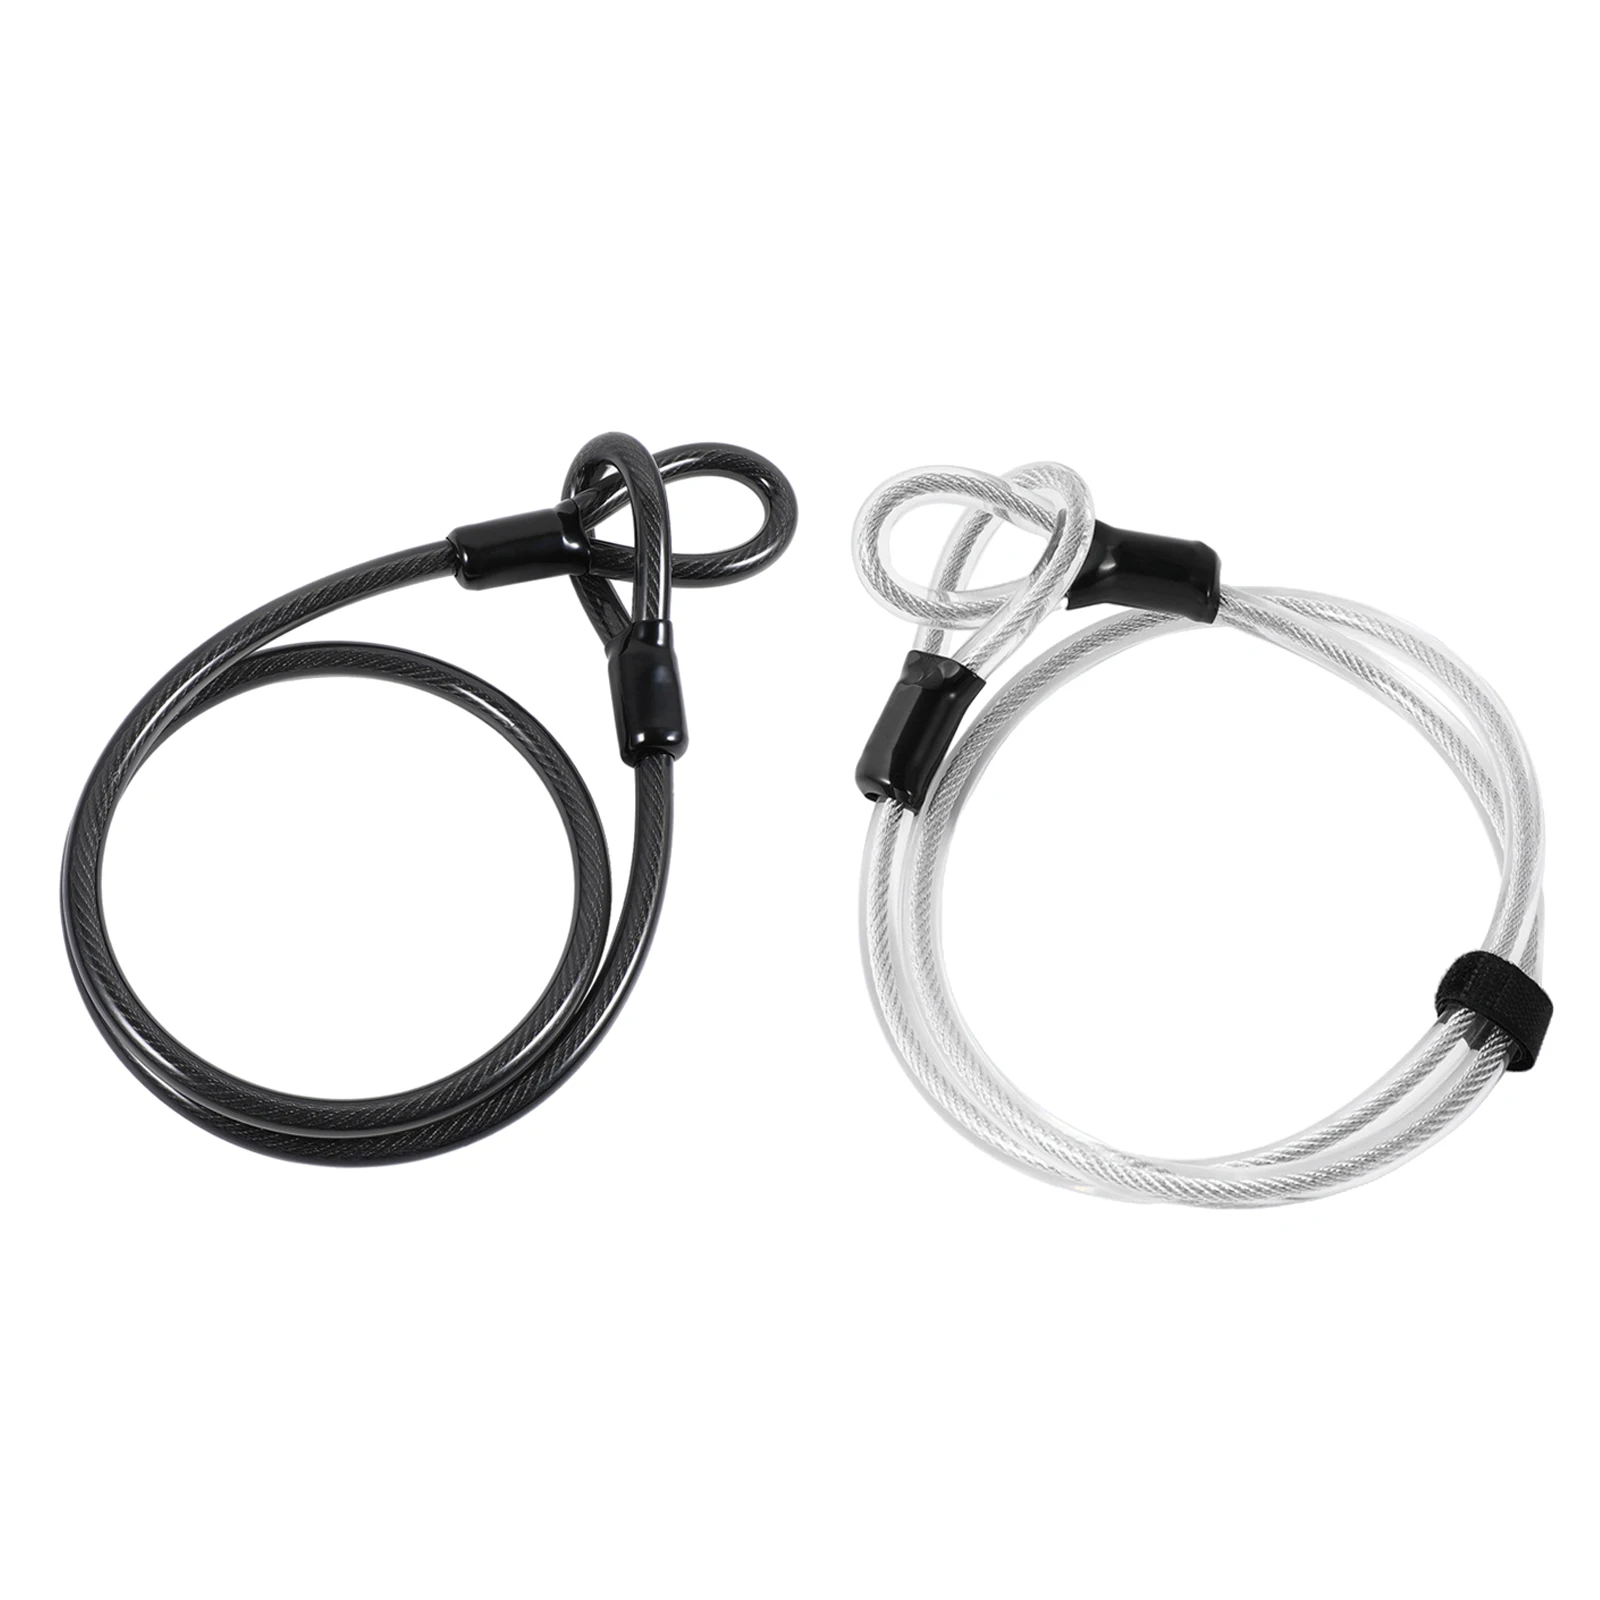 Bike Steel Cable Lock Bicycle Security Steel Cable with Double Loop Lock Cable for U-Lock Padlock